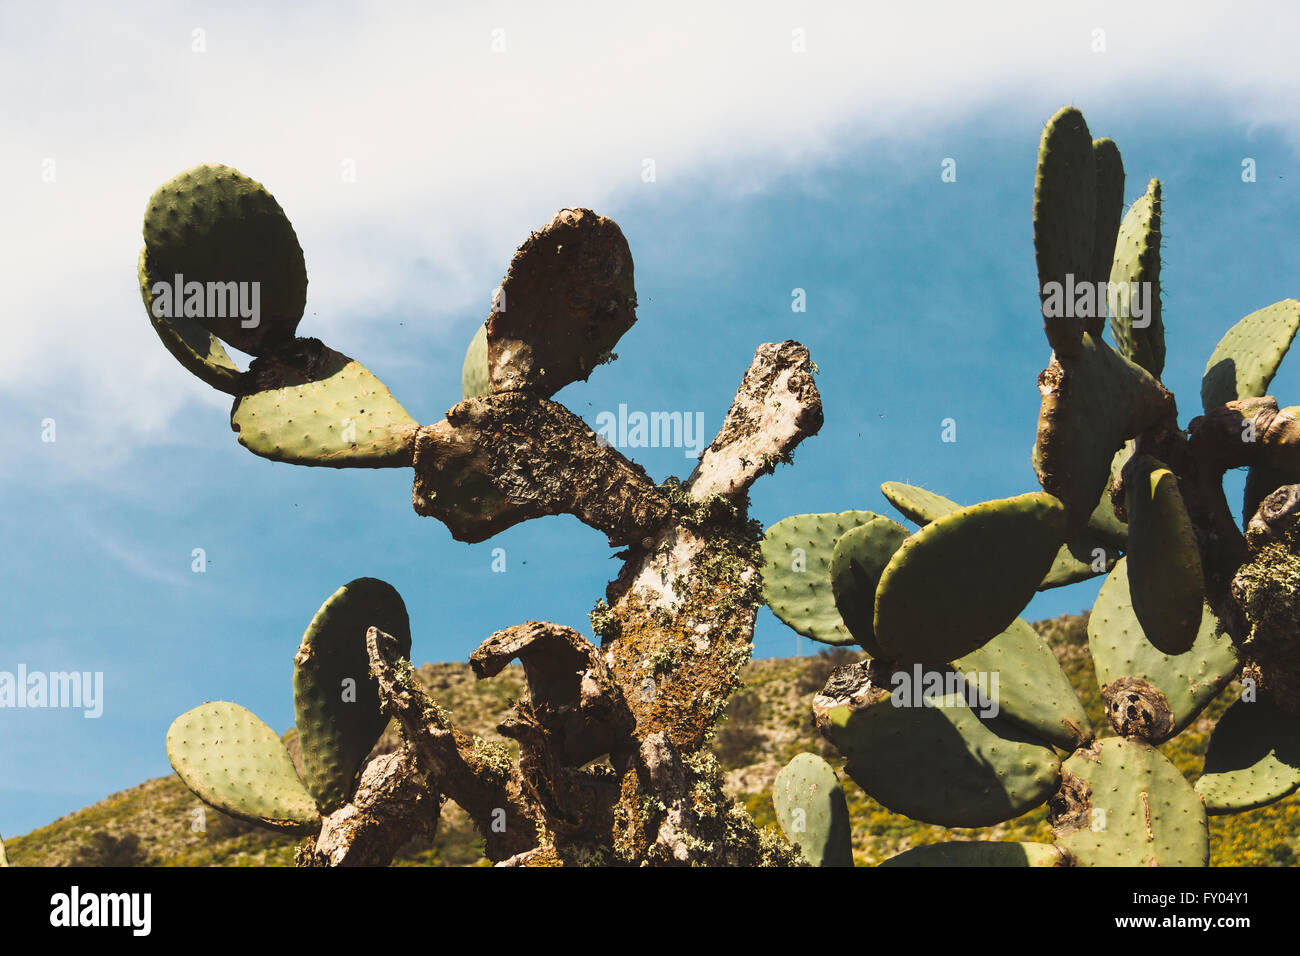 Close up of cacti against a blue sky with a white cloud on the left. Stock Photo